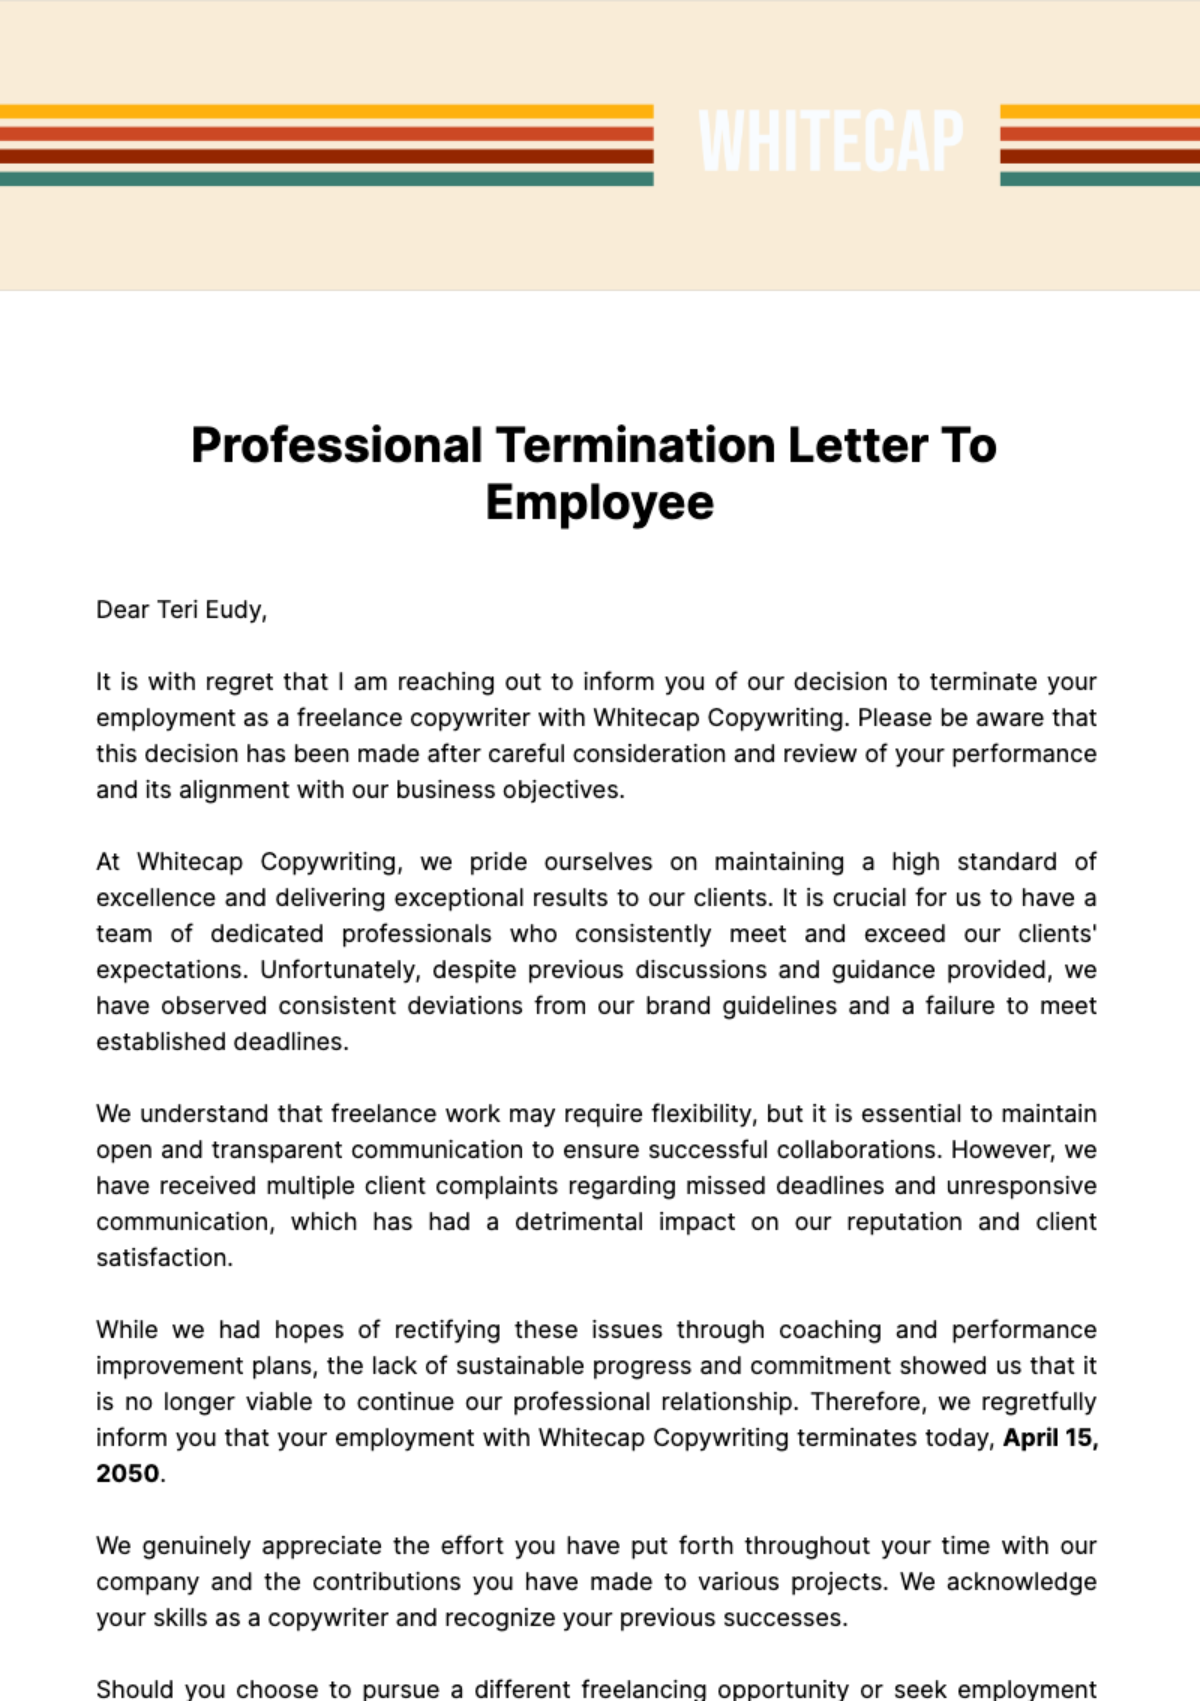 Free Professional Termination Letter to Employee Template